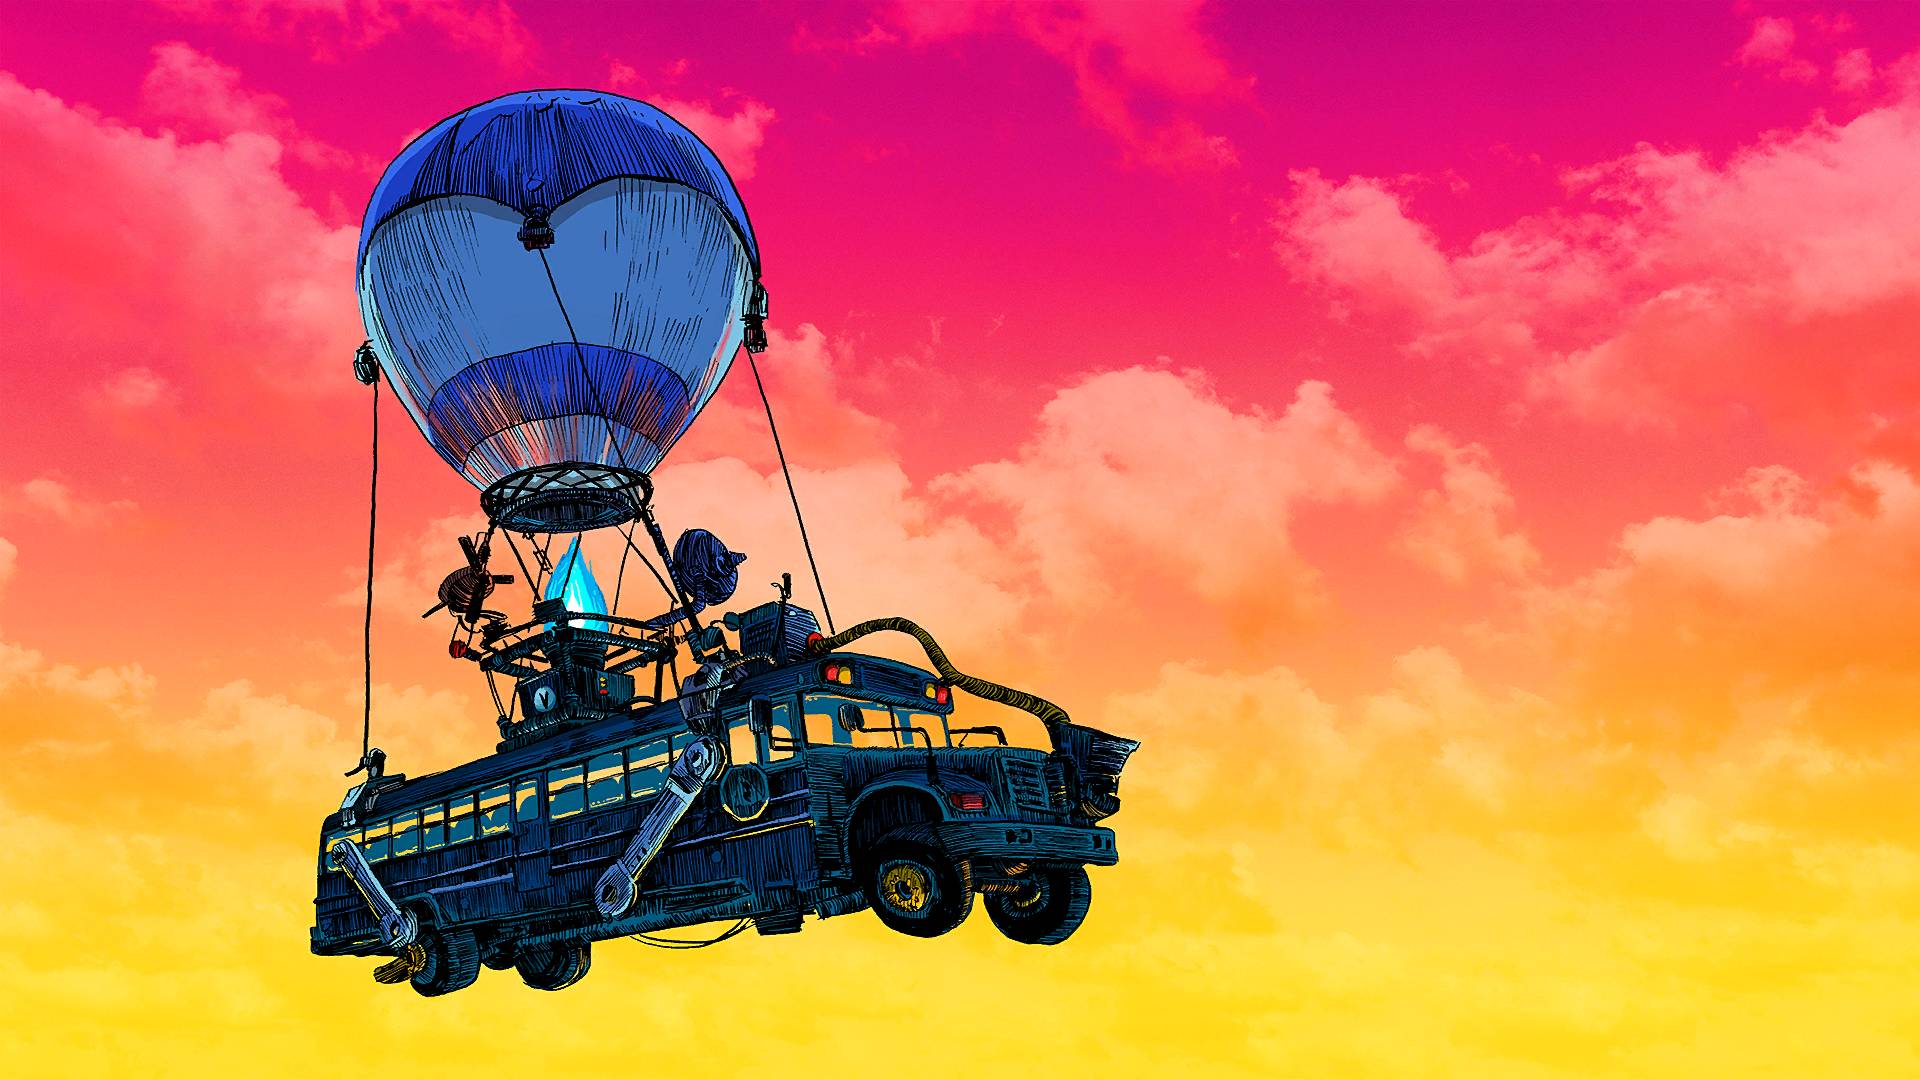 A hot air balloon is being pulled by an old truck - Fortnite